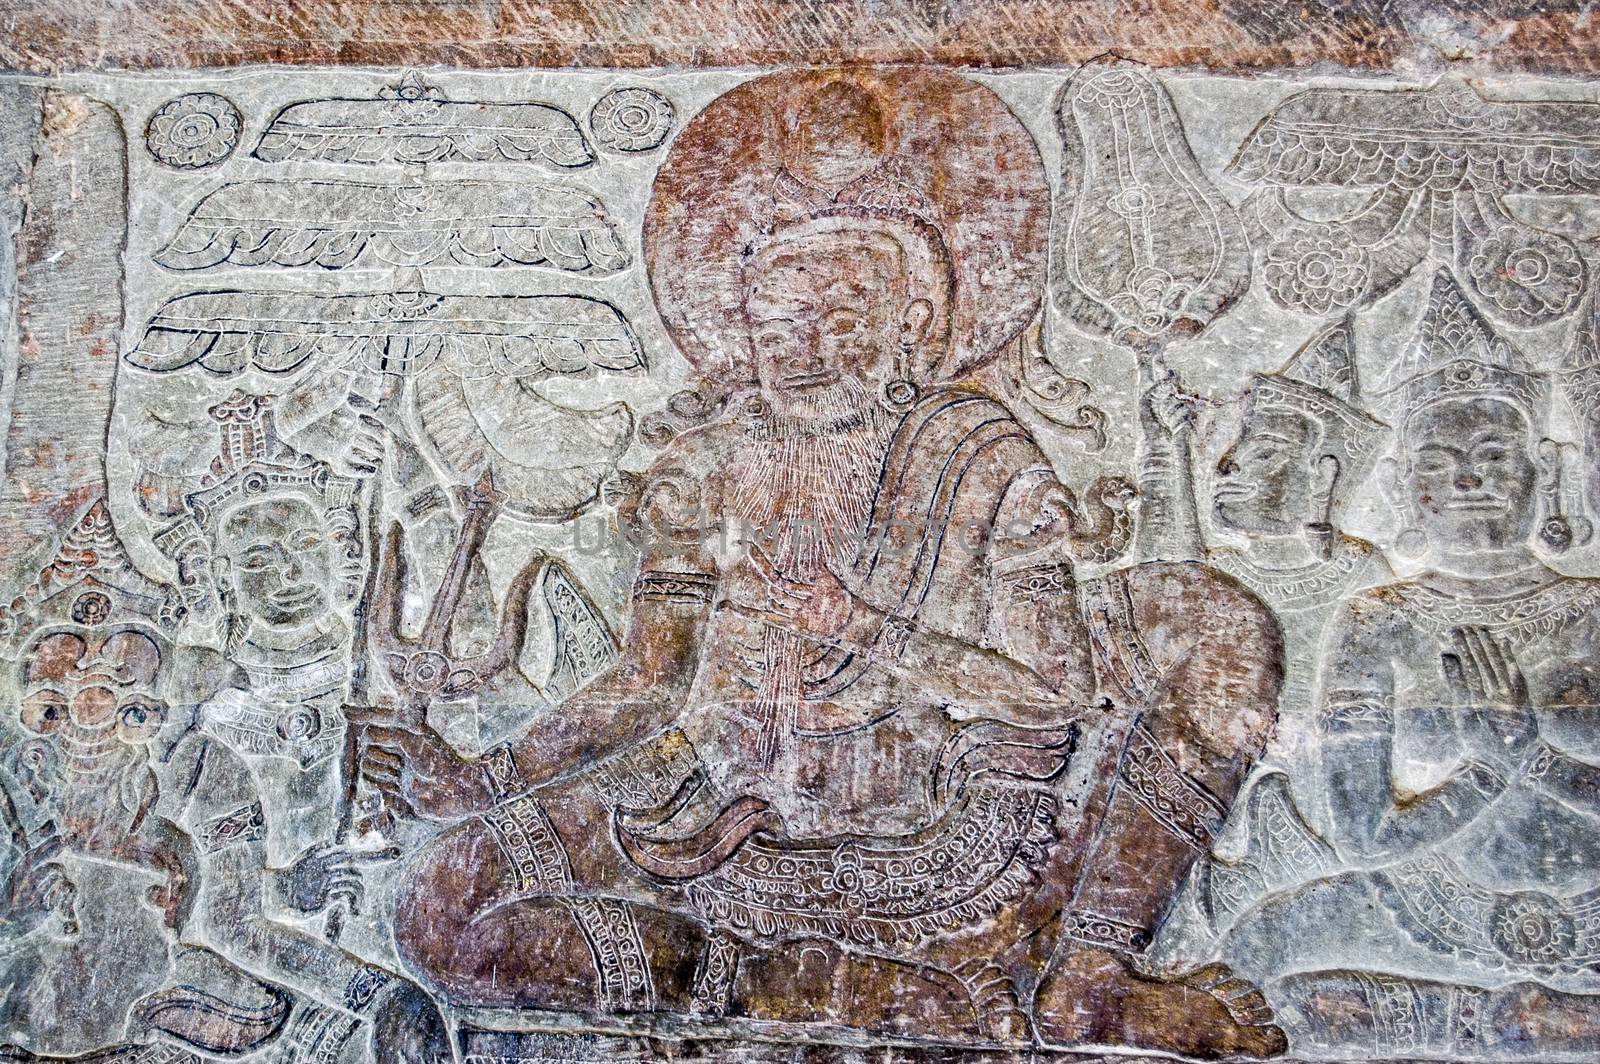 OLd Man bas relief carving, Angkor Wat by BasPhoto